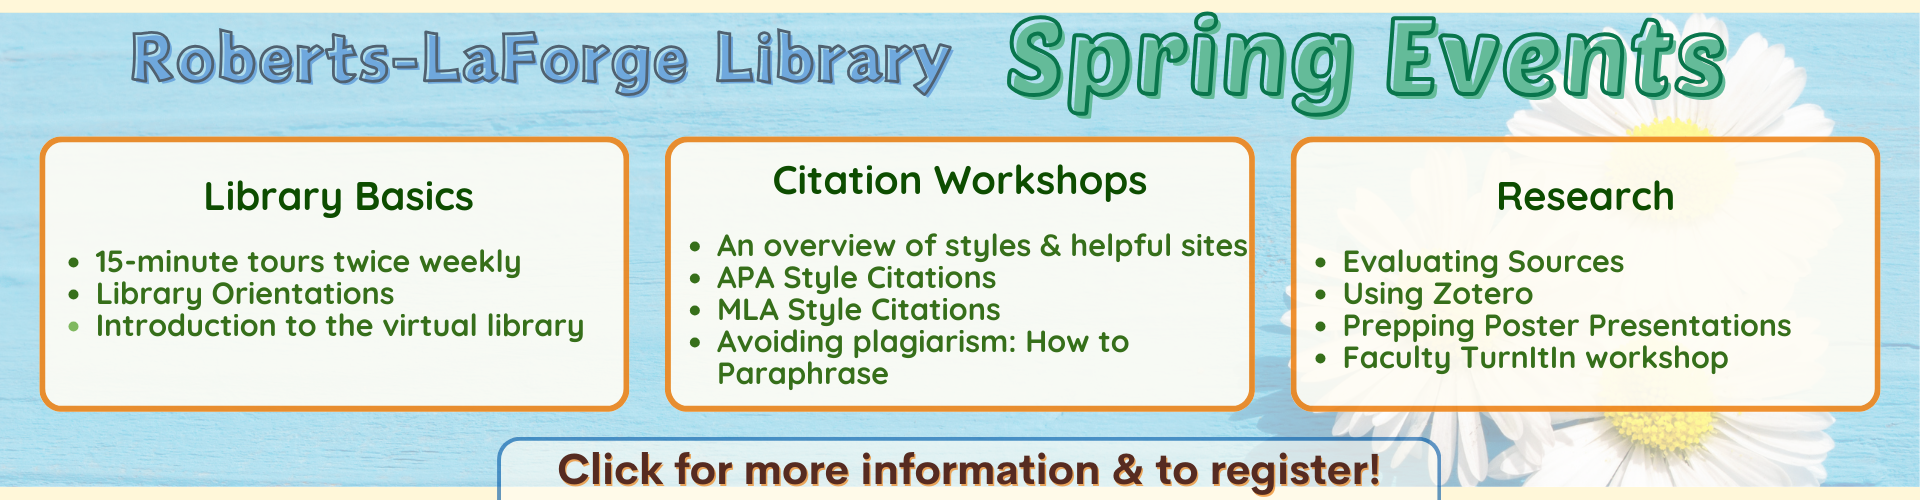 Roberts-LaForge Library listing of Spring Events. For more information, please go to https://www.deltastate.edu/library/home-page/events/